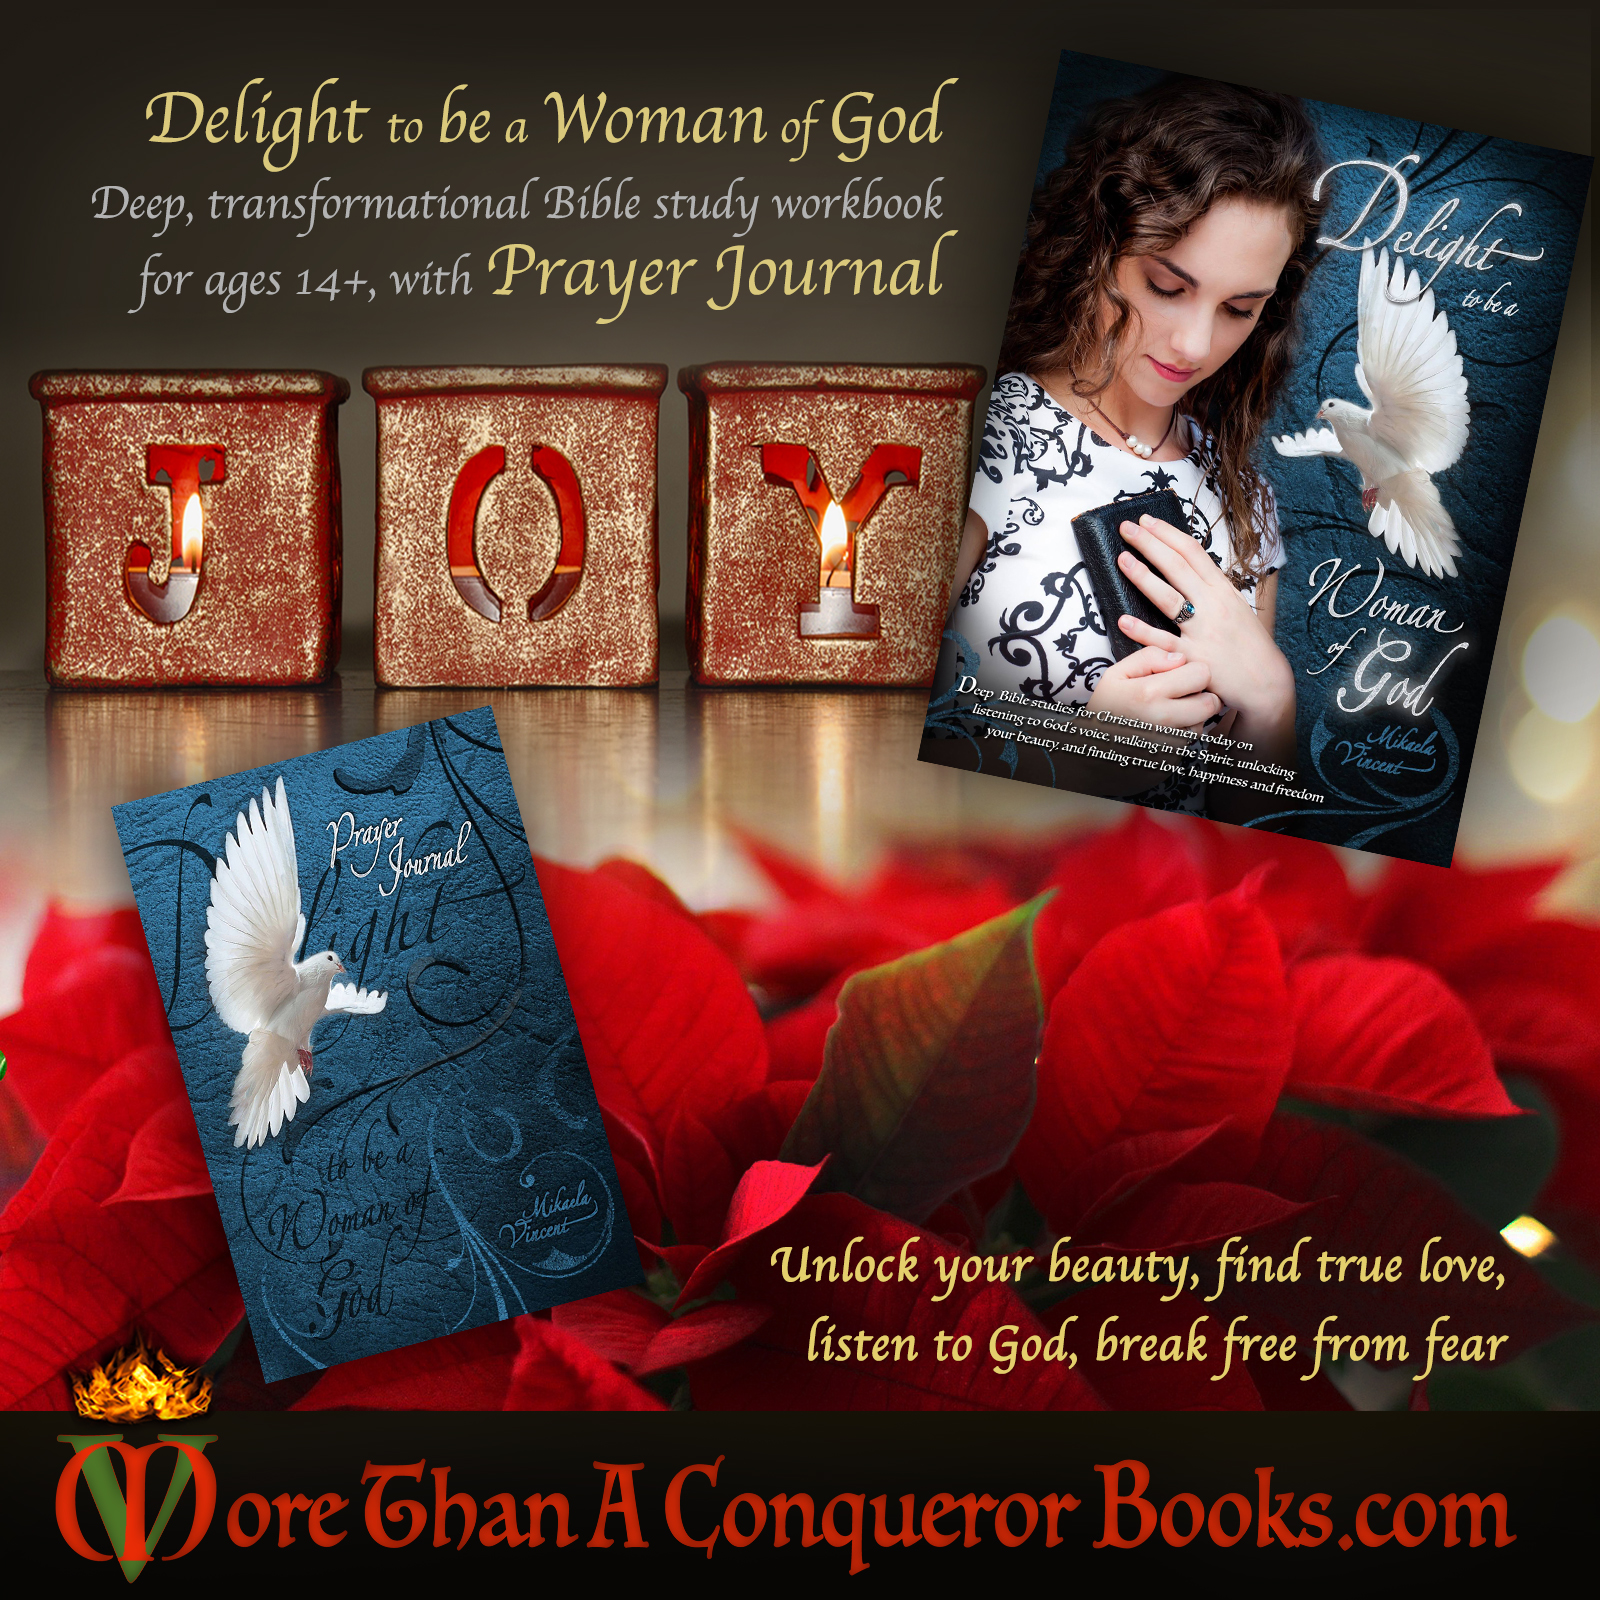 Christmas-Delight to Be a Woman of God-Bible study-prayer journal-Mikaela Vincent-MoreThanAConquerorBooks.jpg